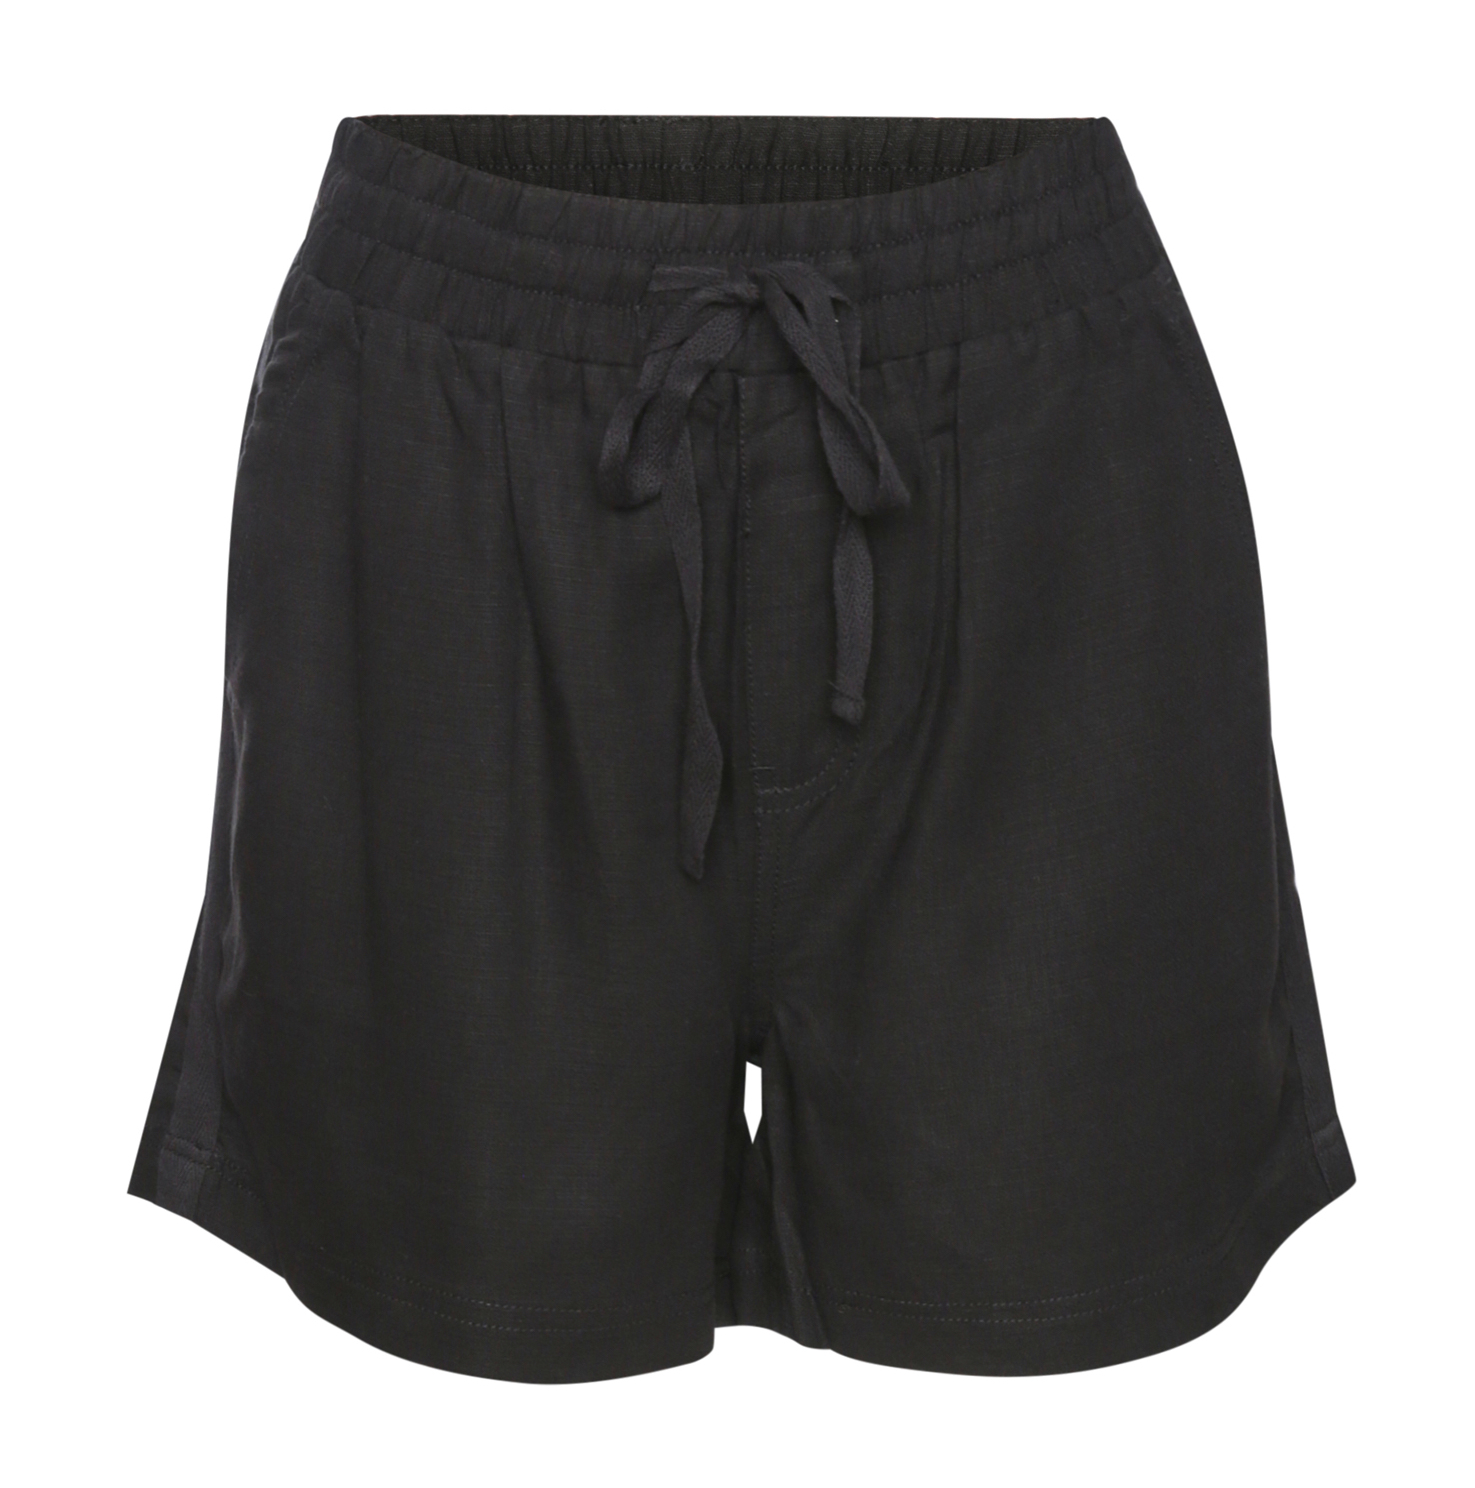 Search for Sanity Side Contrast Shorts